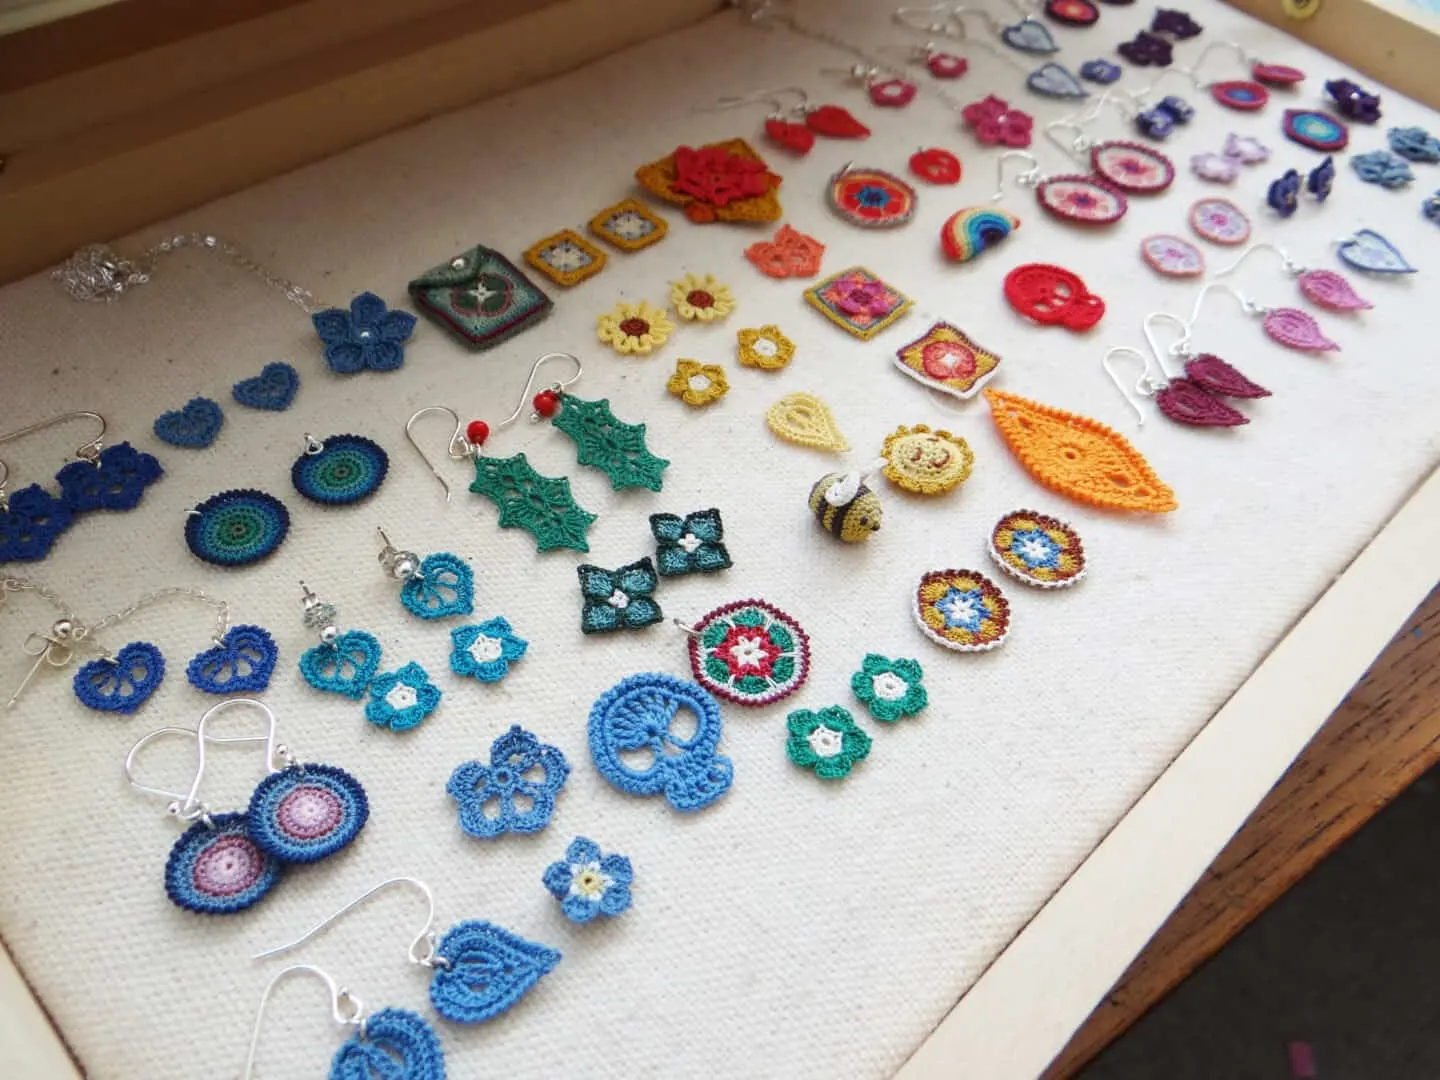 micro crochet earrings and motifs laid out in wooden presentation box, including holly leaves, granny squares, tiny flowers, skulls, bumble bees and more